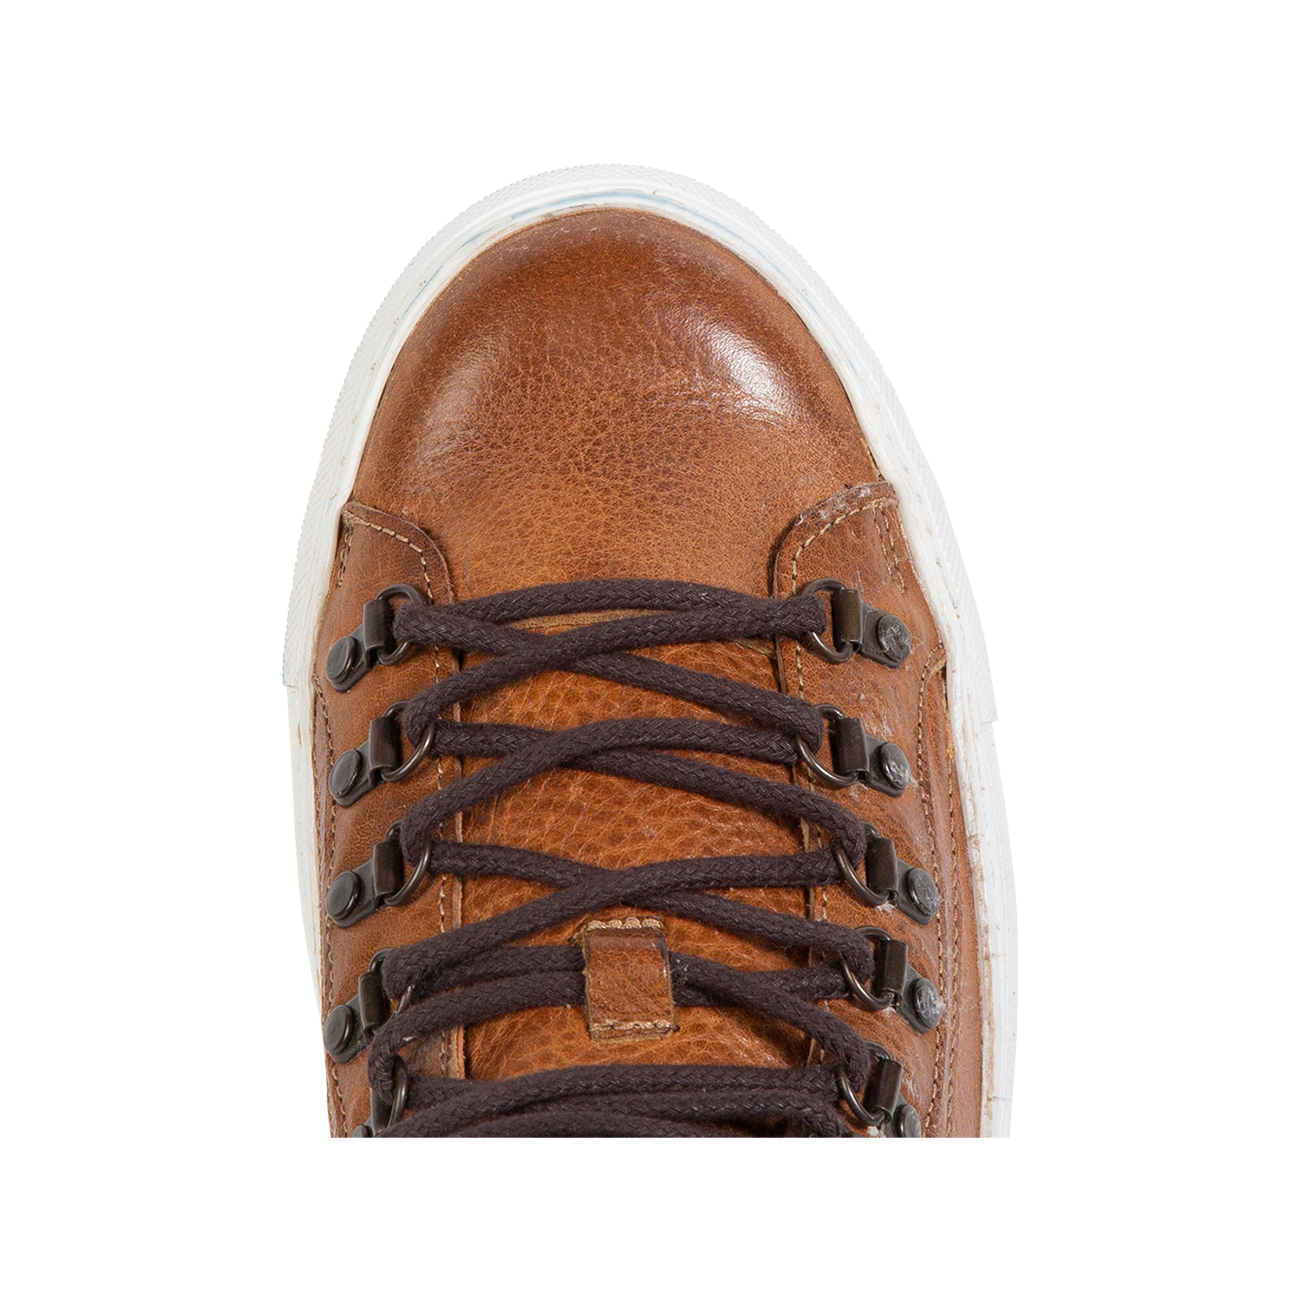 Top view showing round toe and brass rivets on FREEBIRD men's Shelby cognac shoe